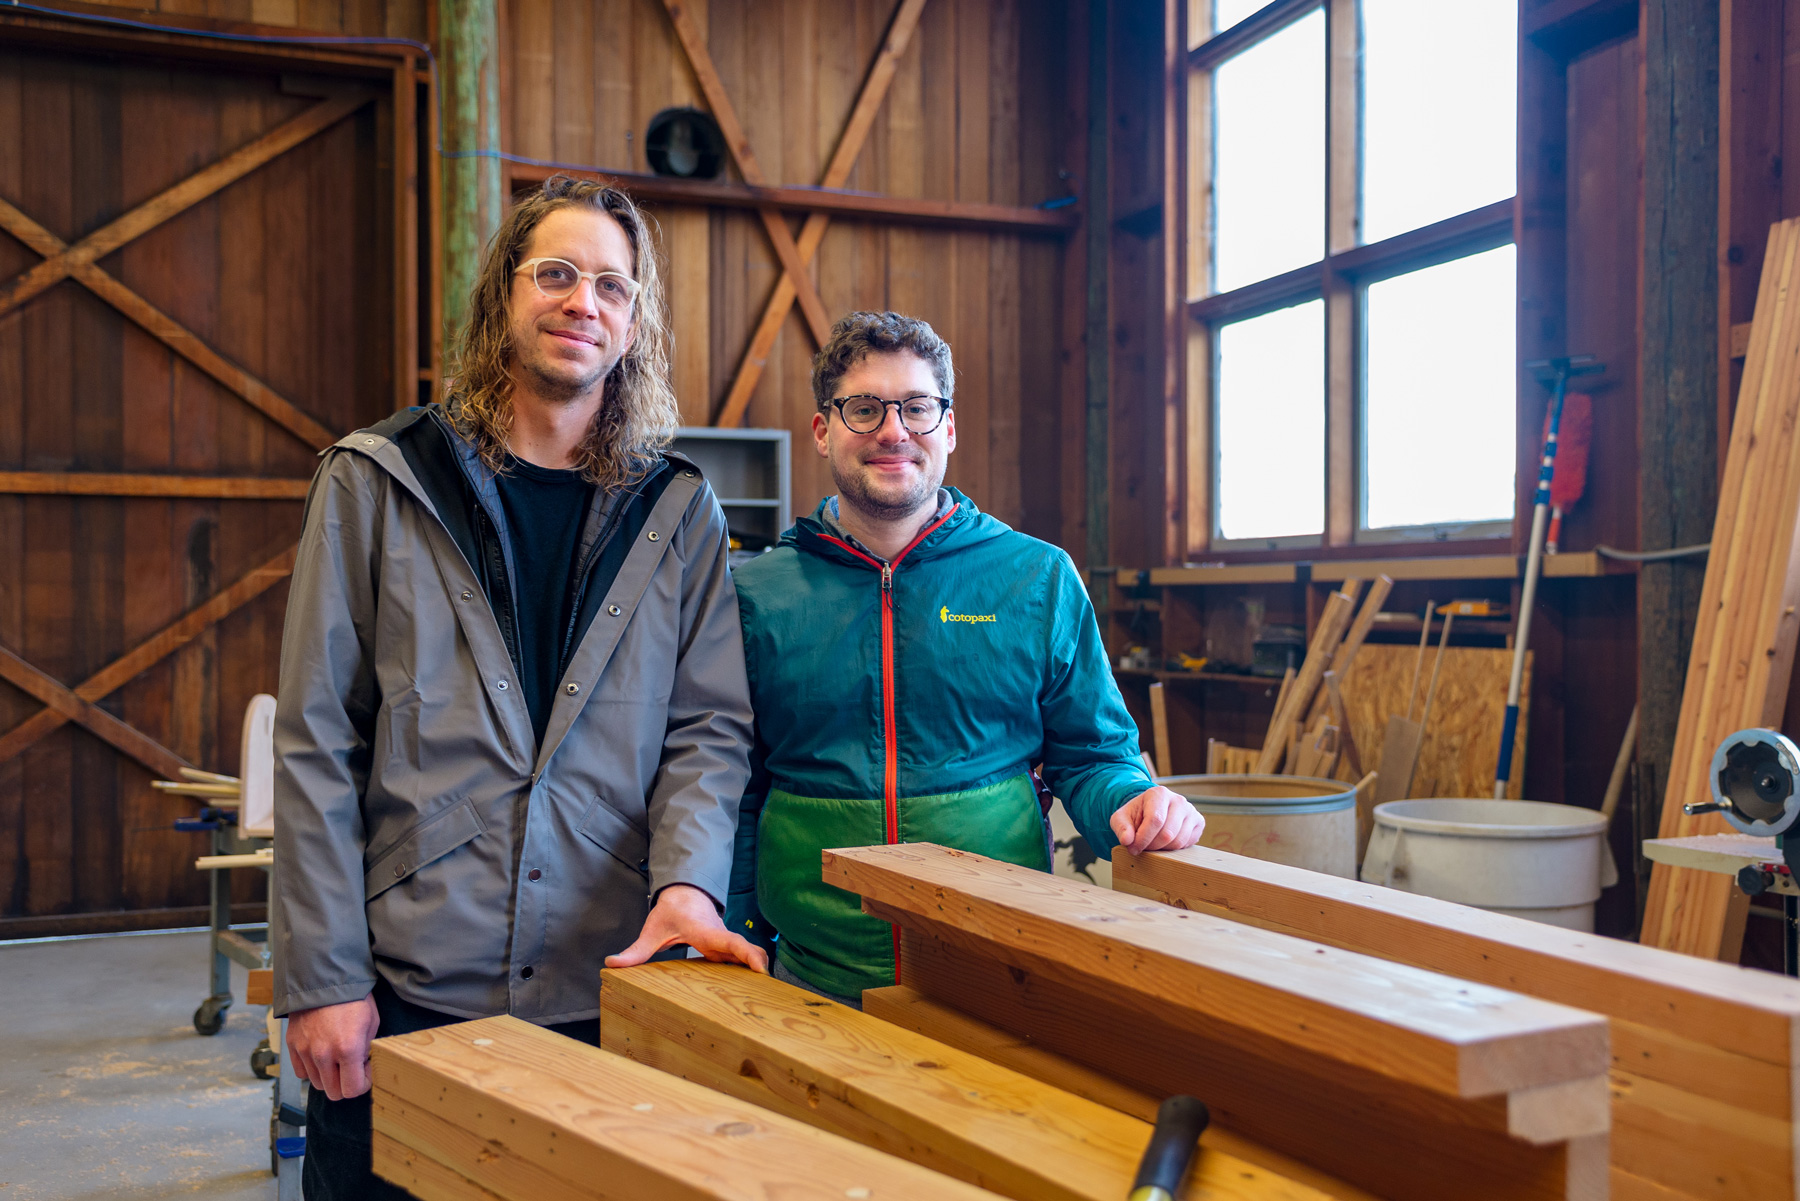 Two men stand in a wood shop and smile at the camera. A pile of lumber is on a table in front of them.